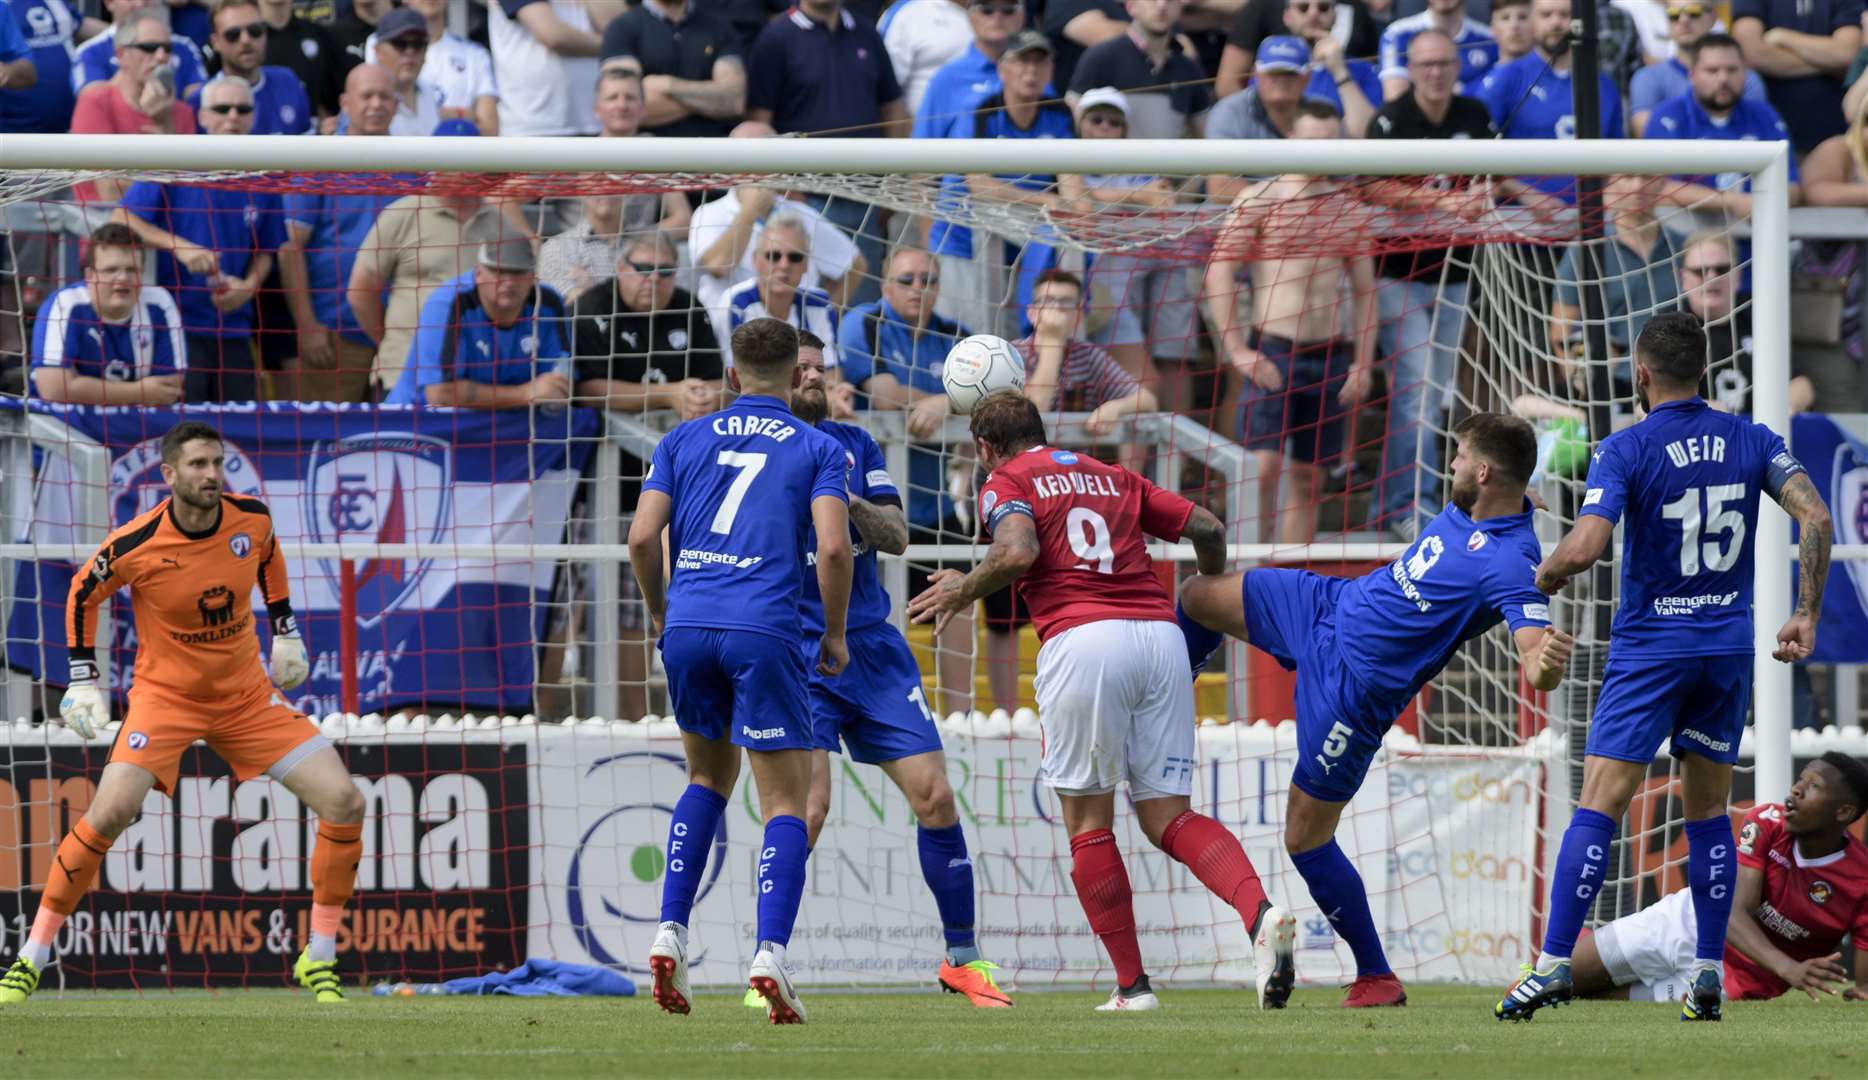 Danny Kedwell heads towards goal against Chesterfield Picture: Andy Payton